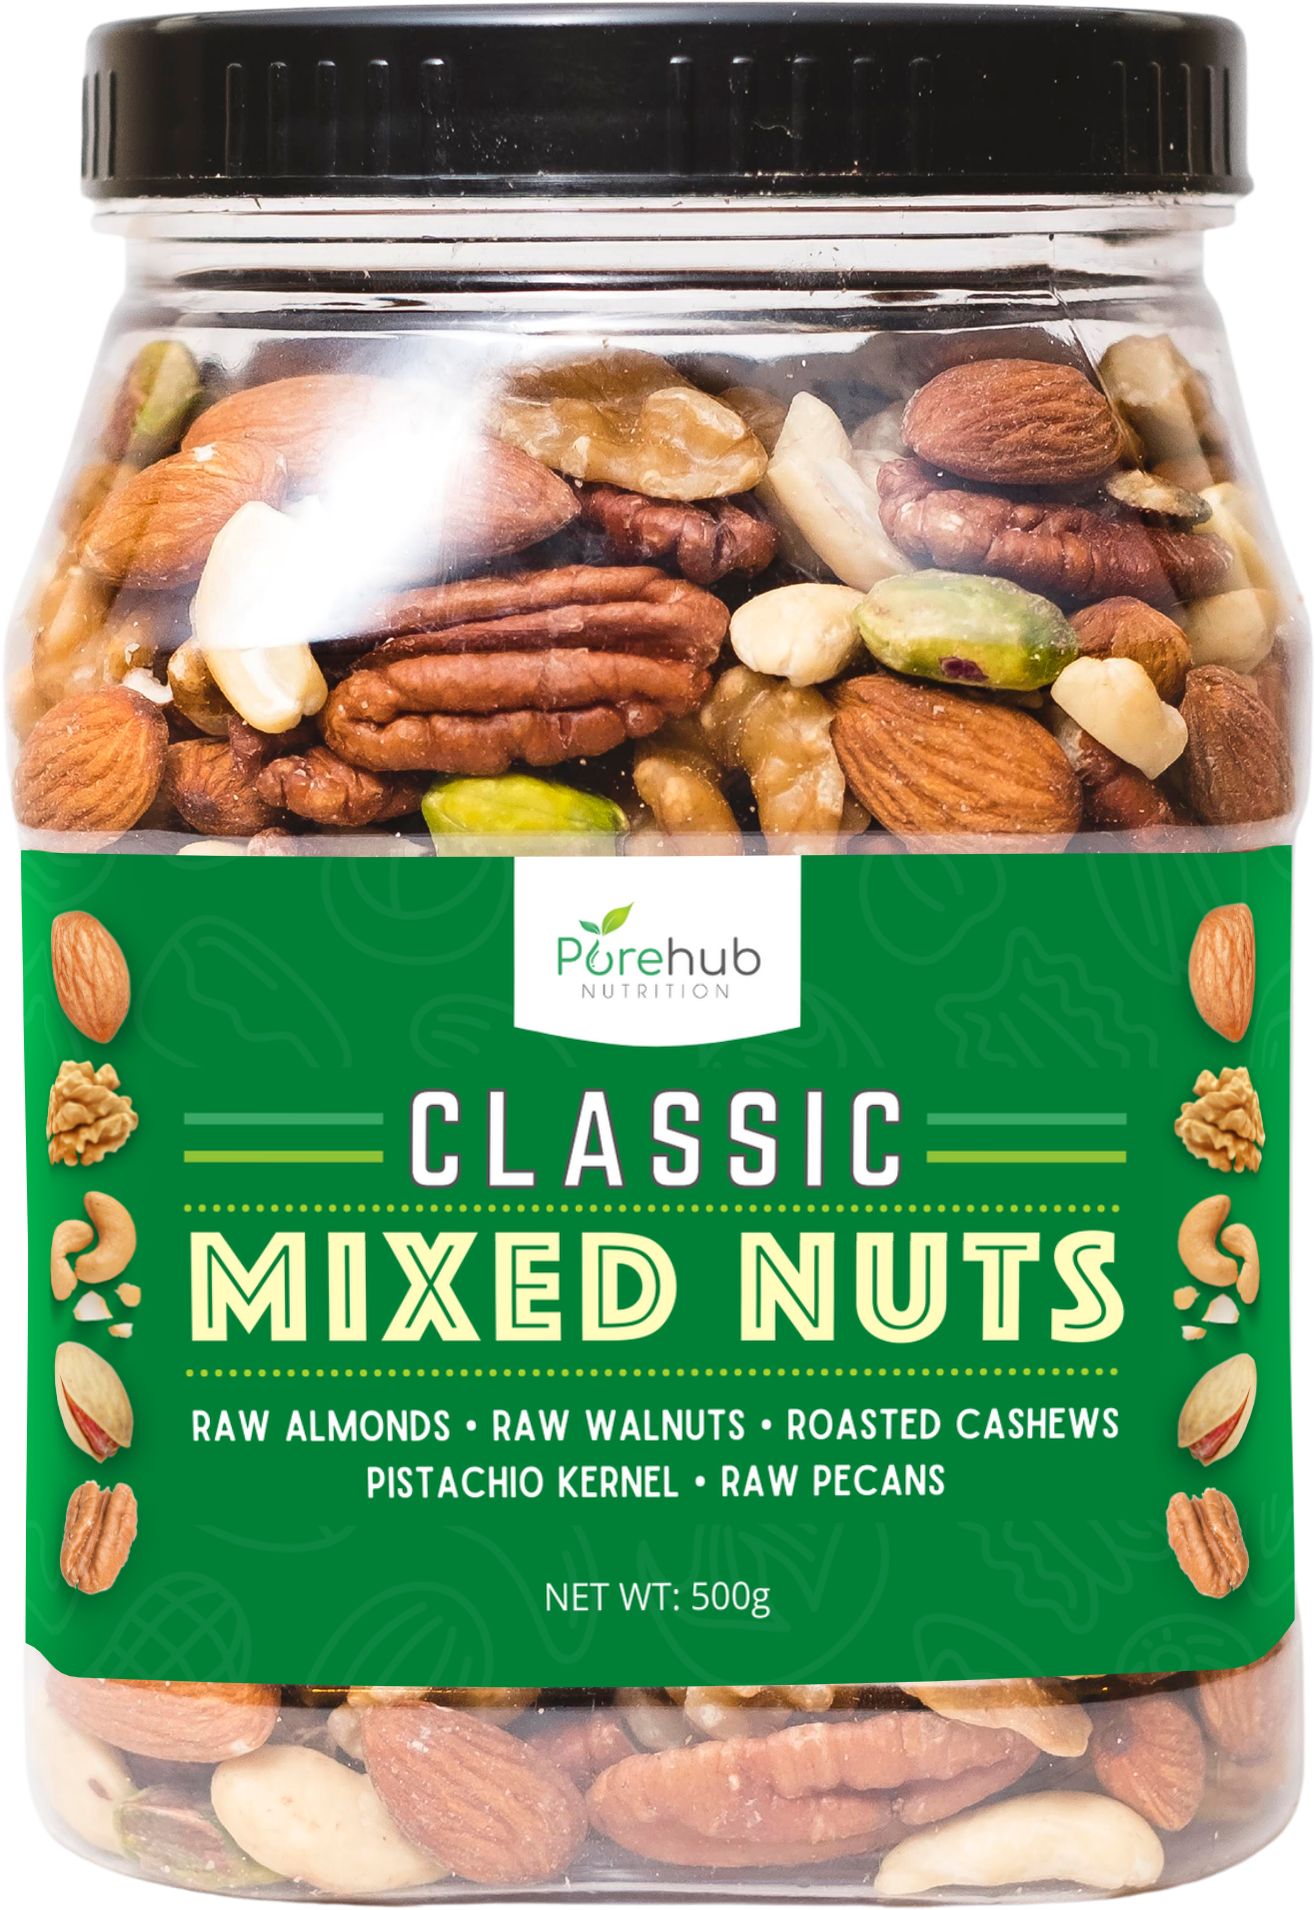 CLASSIC MIXED NUTS